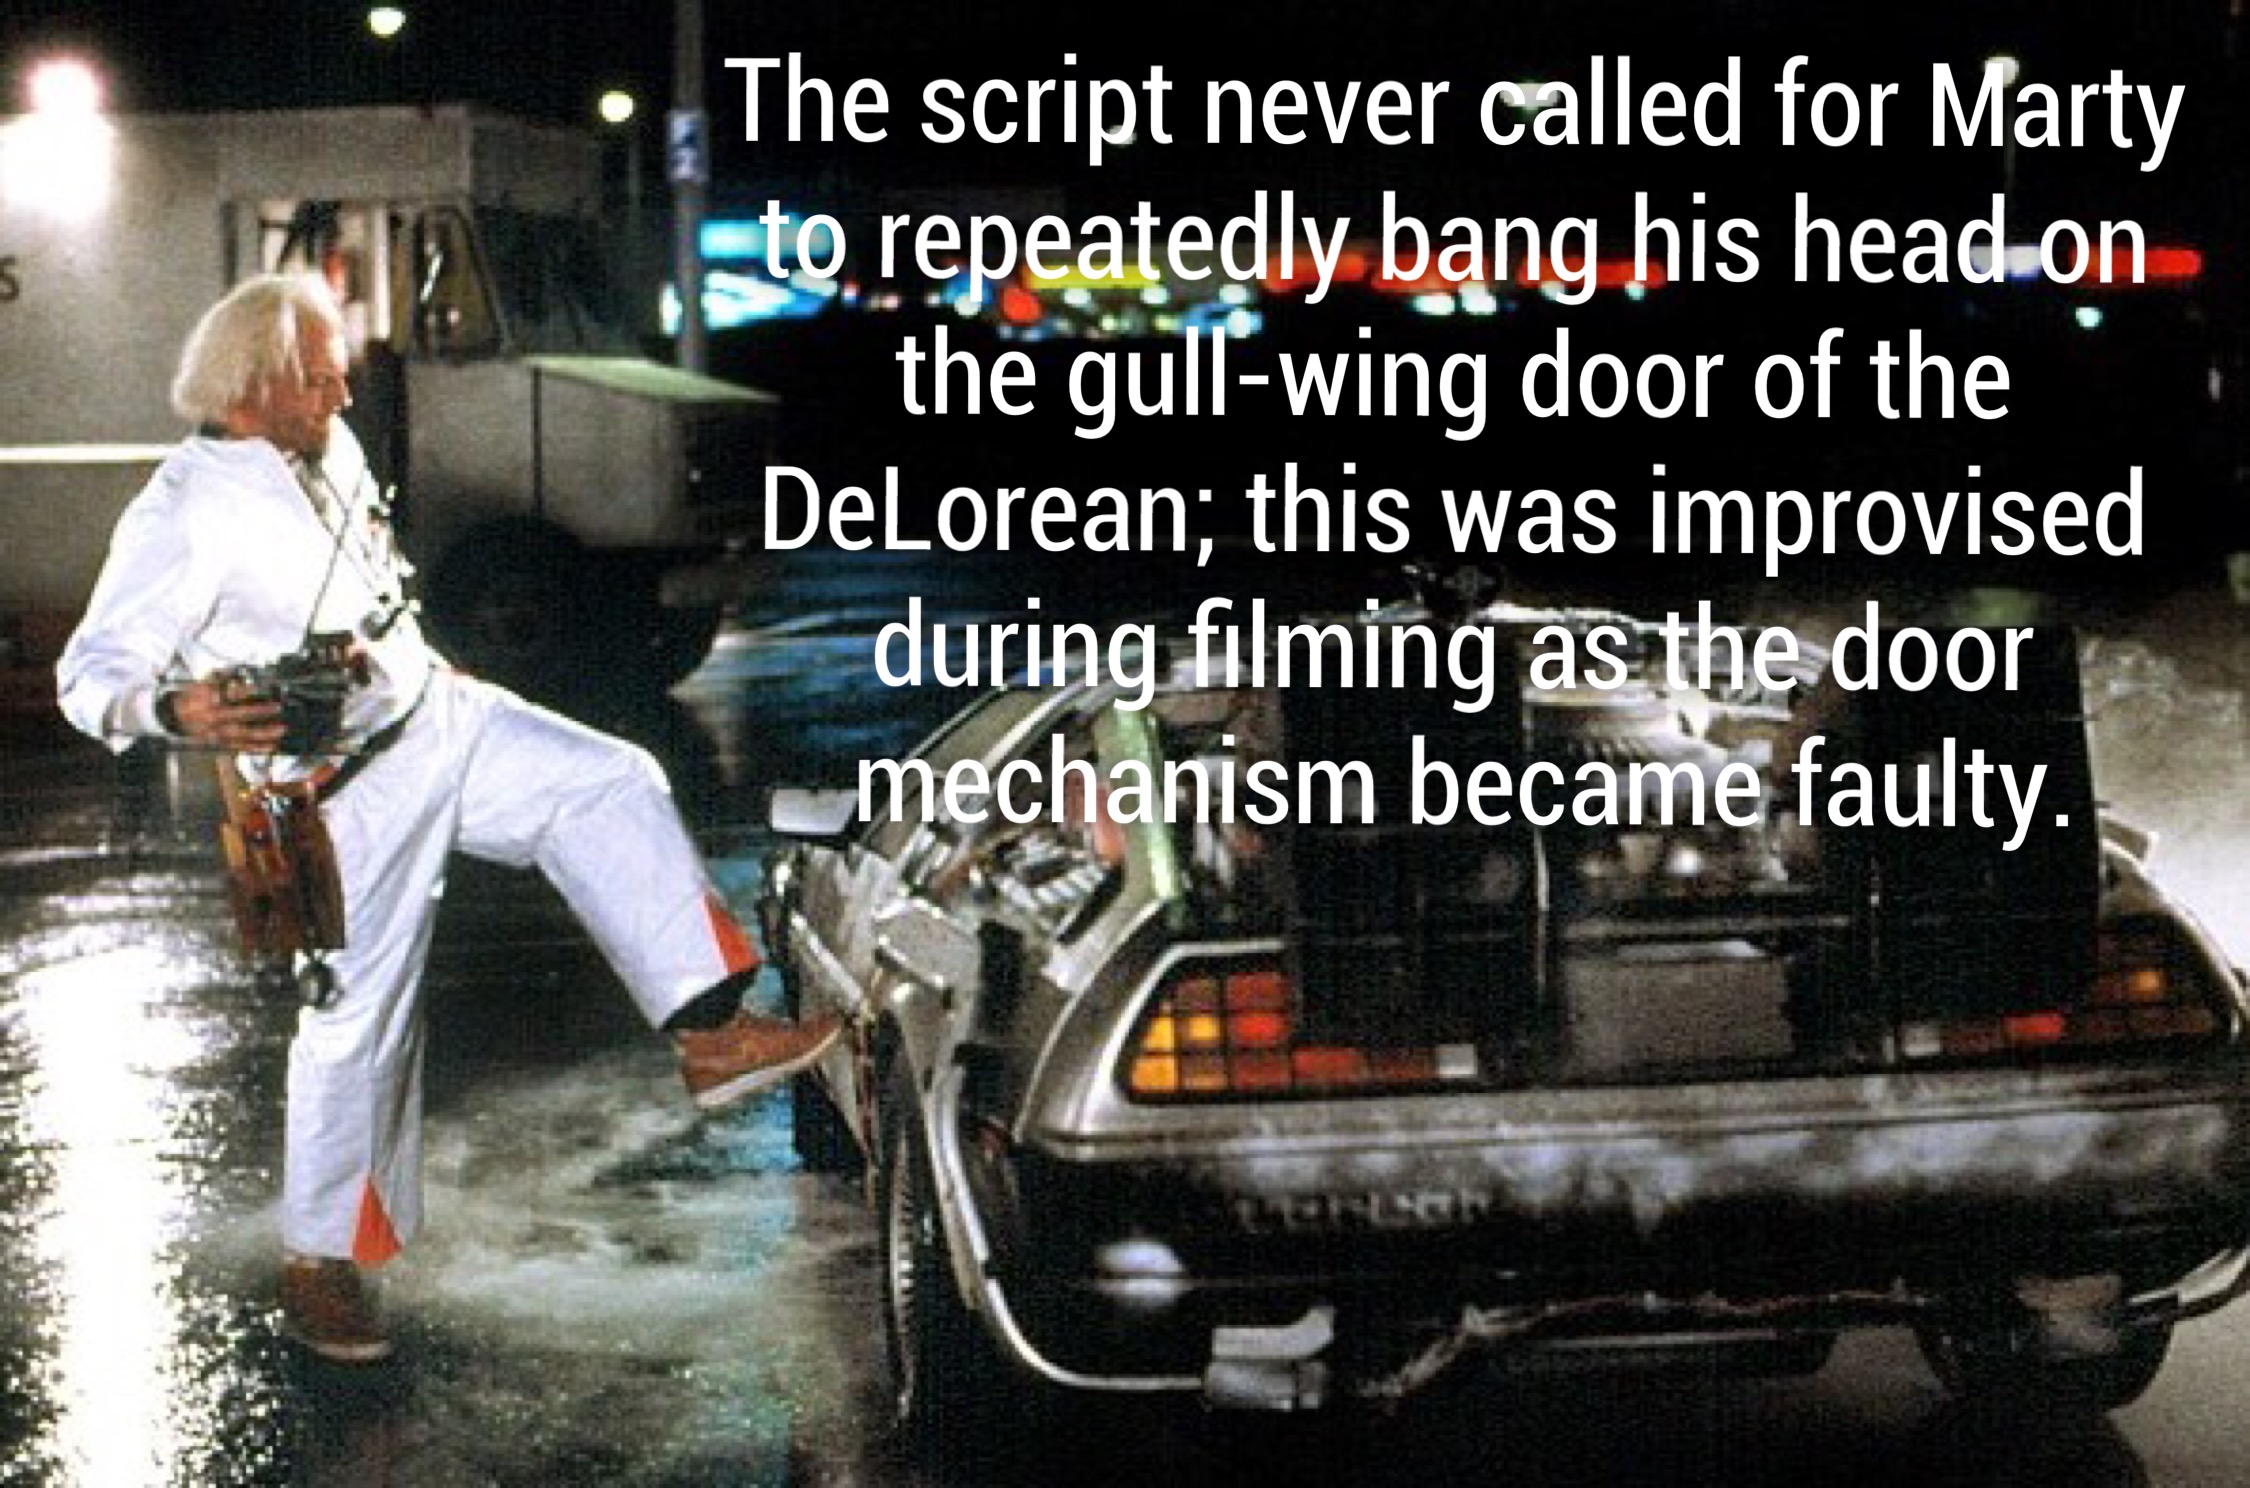 back to the future delorean 1985 - The script never called for Marty to repeatedly bang his headon the gullwing door of the DeLorean; this was improvised during filming as the door mechanism became faulty.